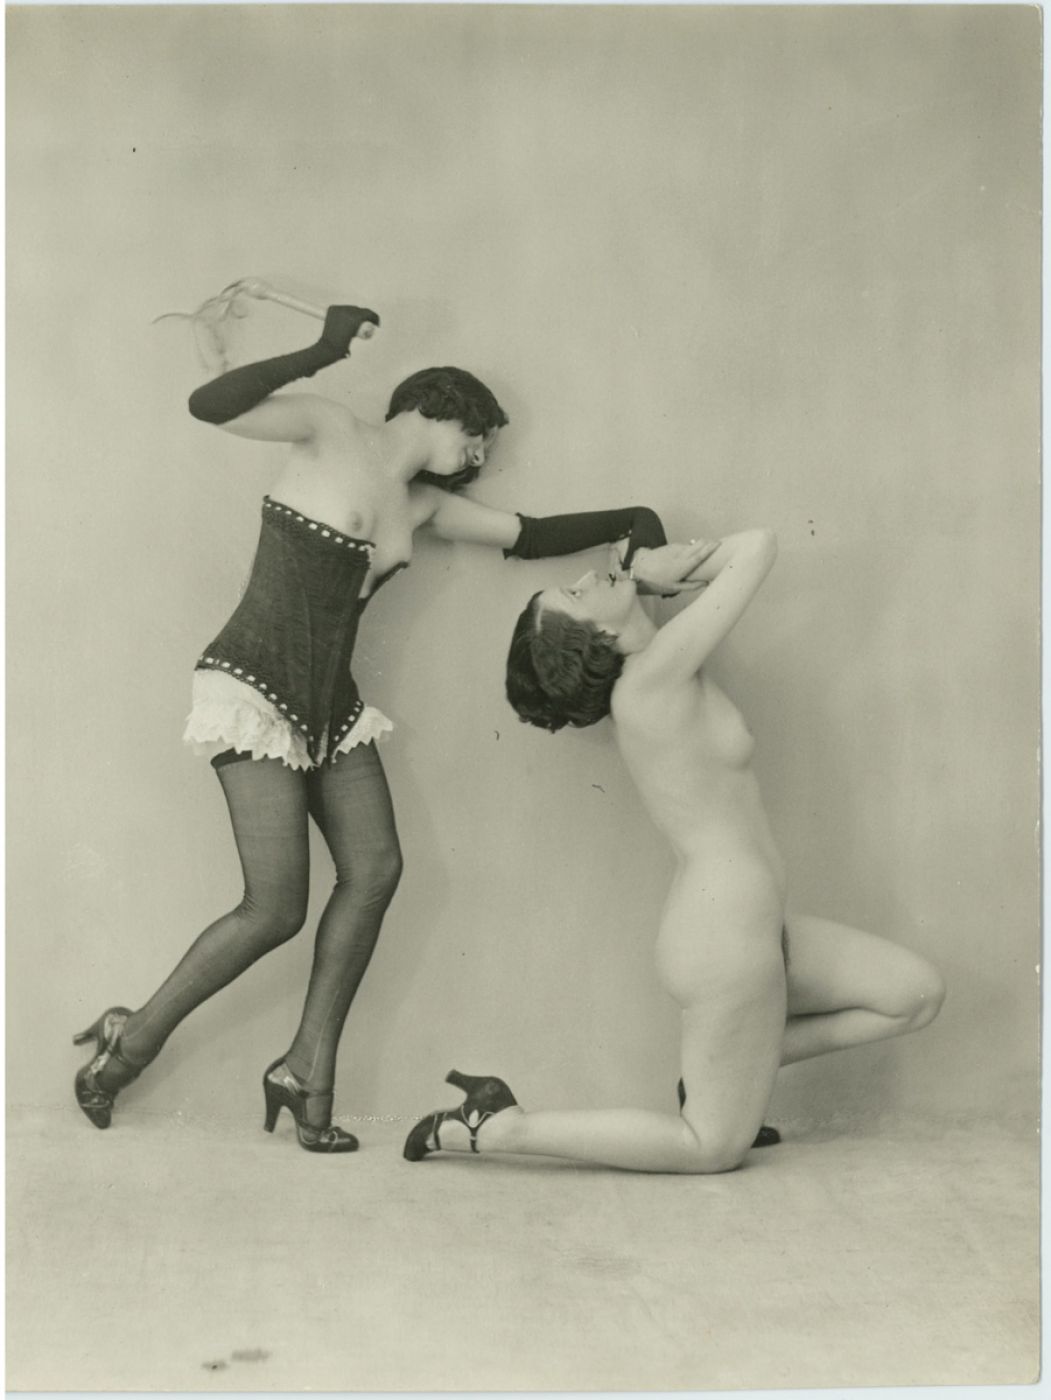 Studio Biederer, “Untitled (The whipping)”, 1925 ca.